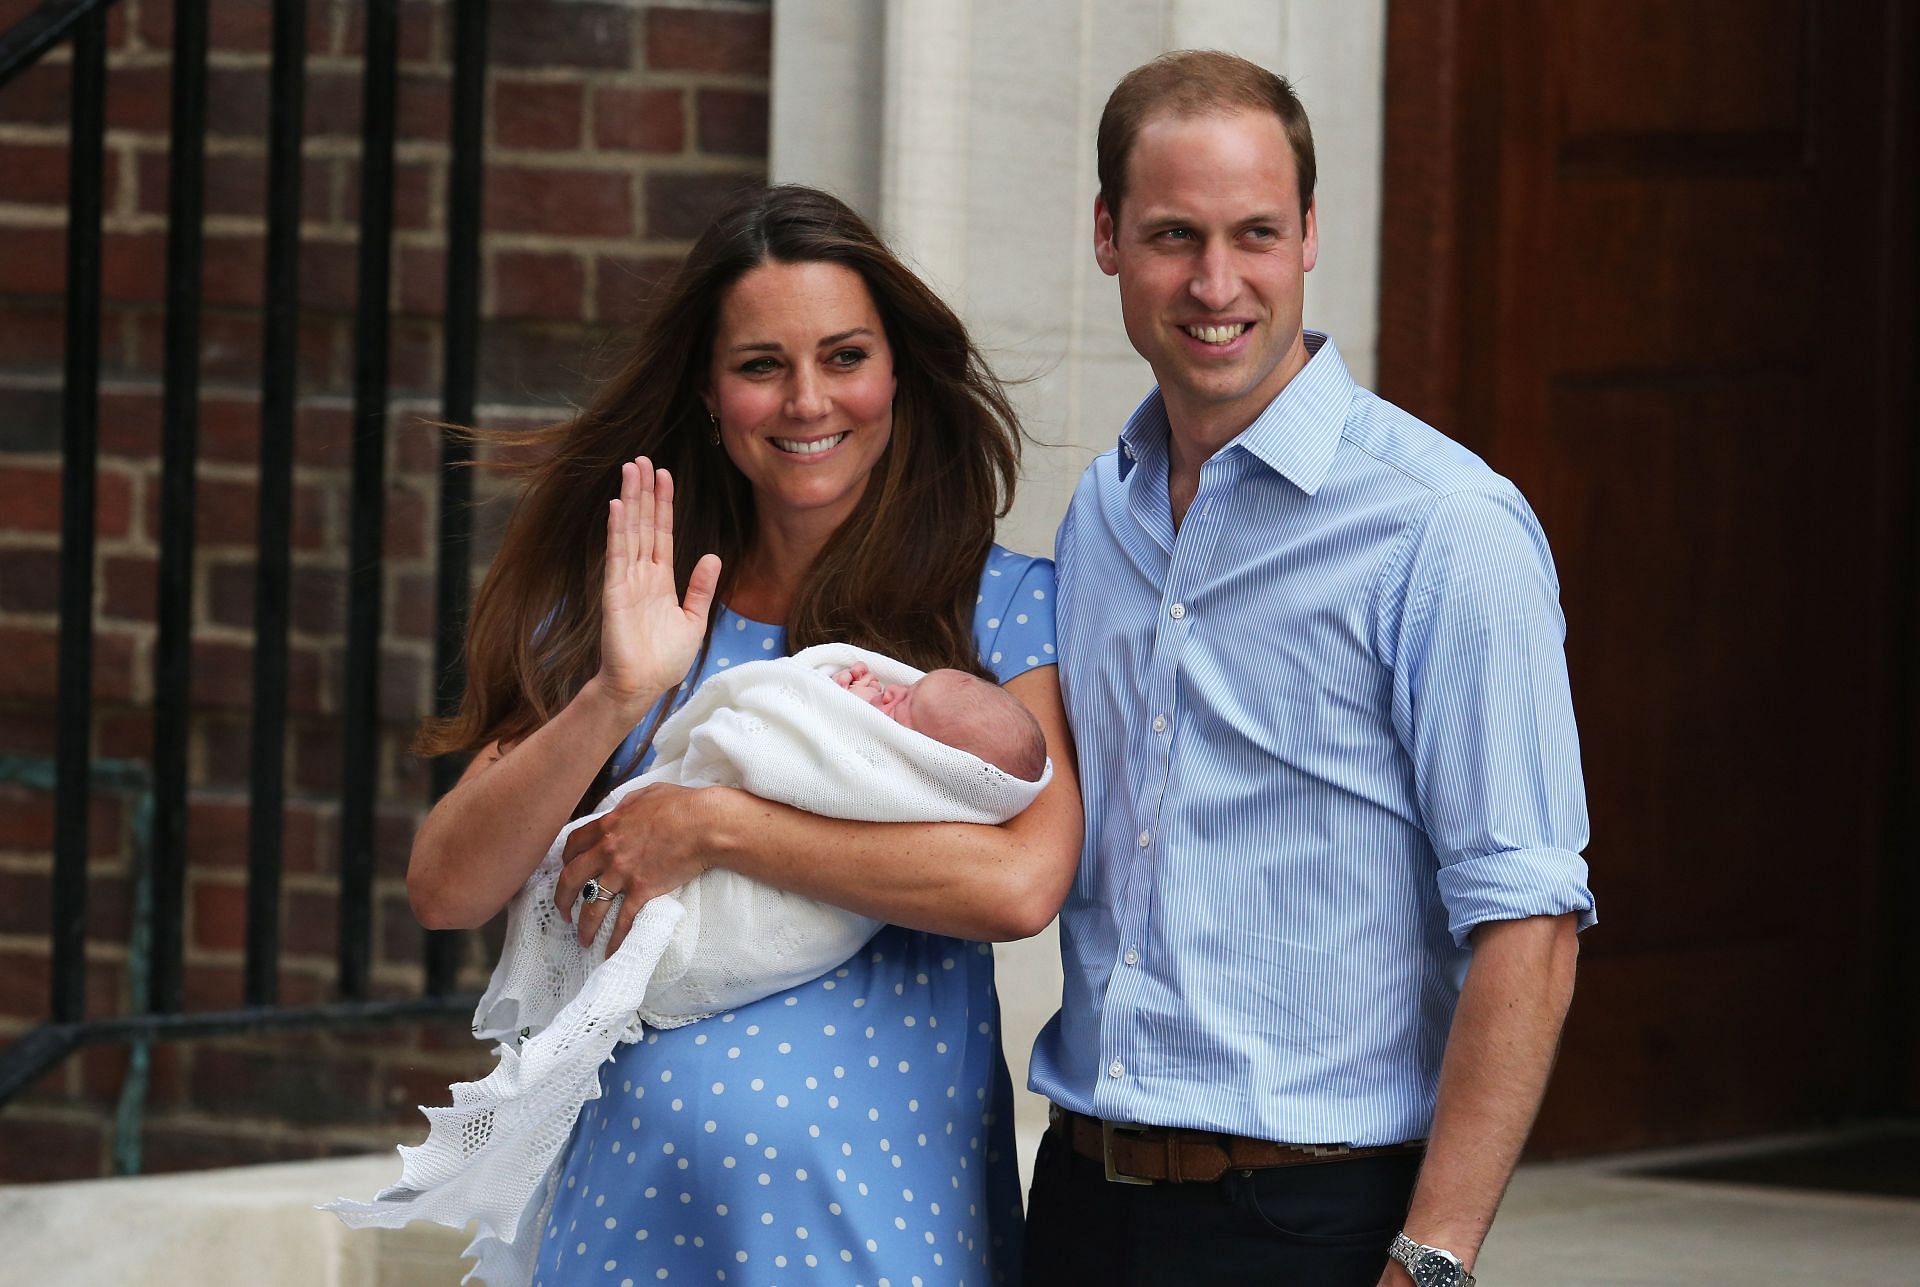 The Duke And Duchess Of Cambridge leave The Lindo Wing With Their Newborn Son in 2013 (Image via Getty)